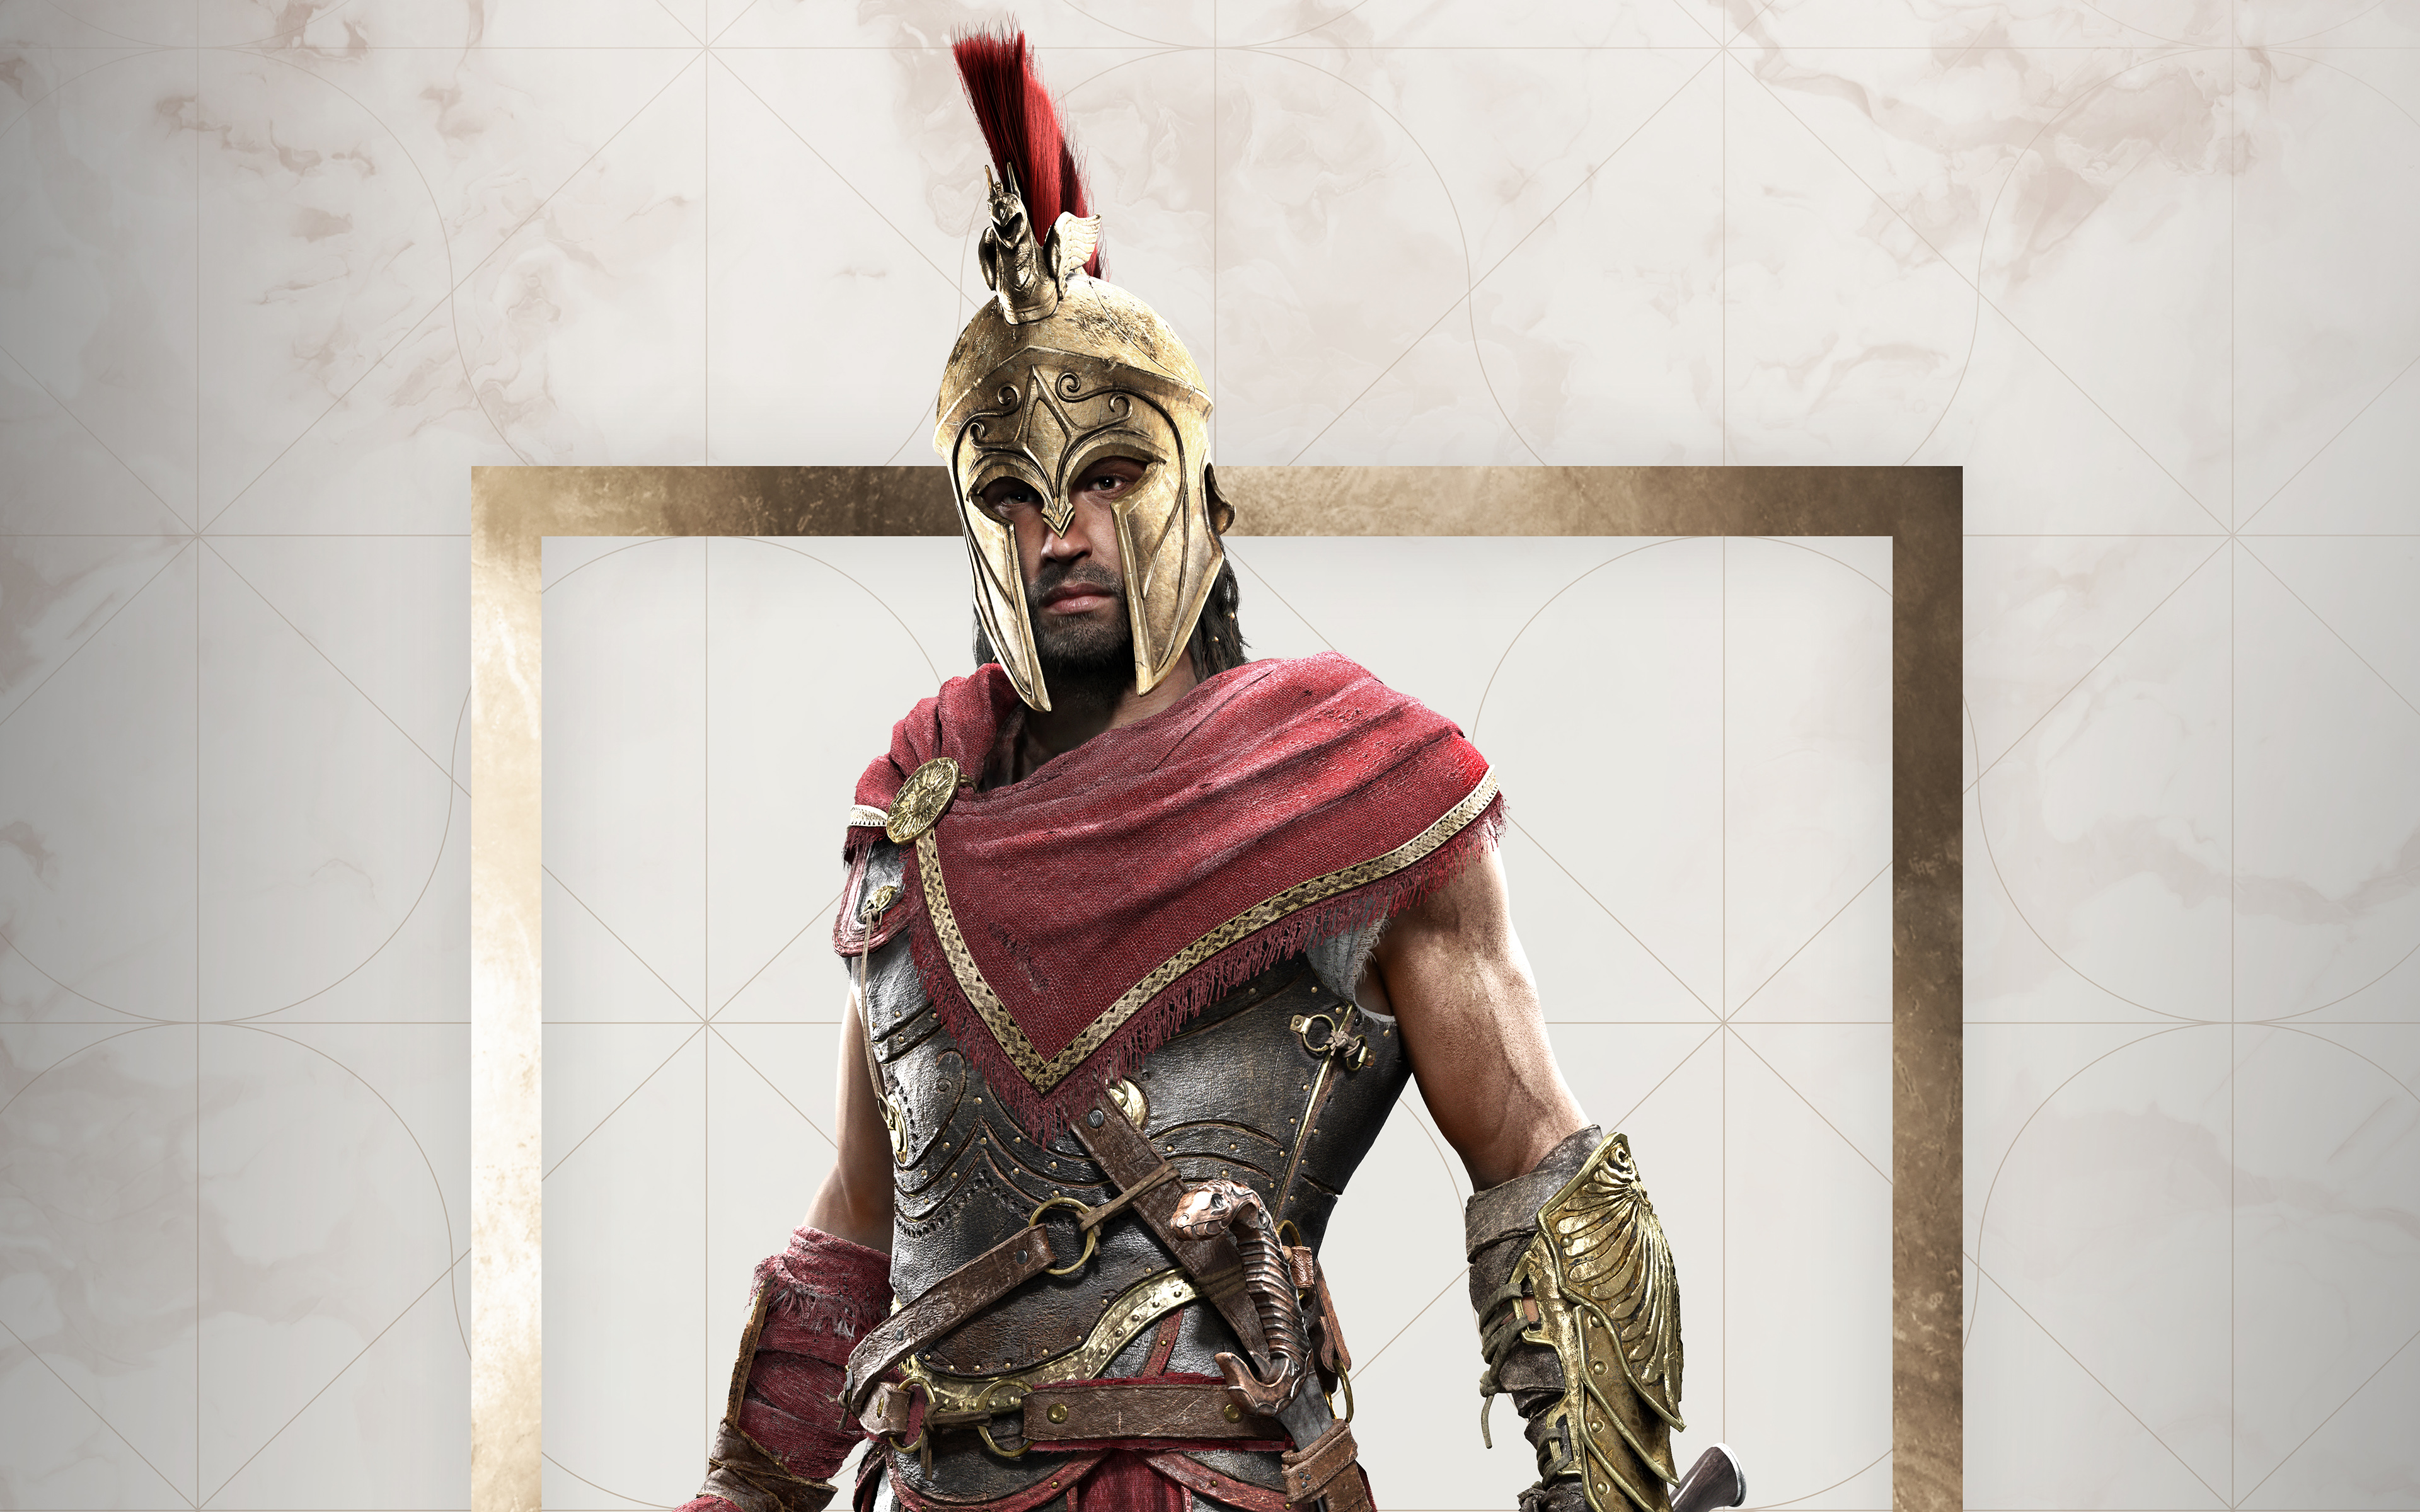 Alexios Assassin's Creed Odyssey Wallpapers